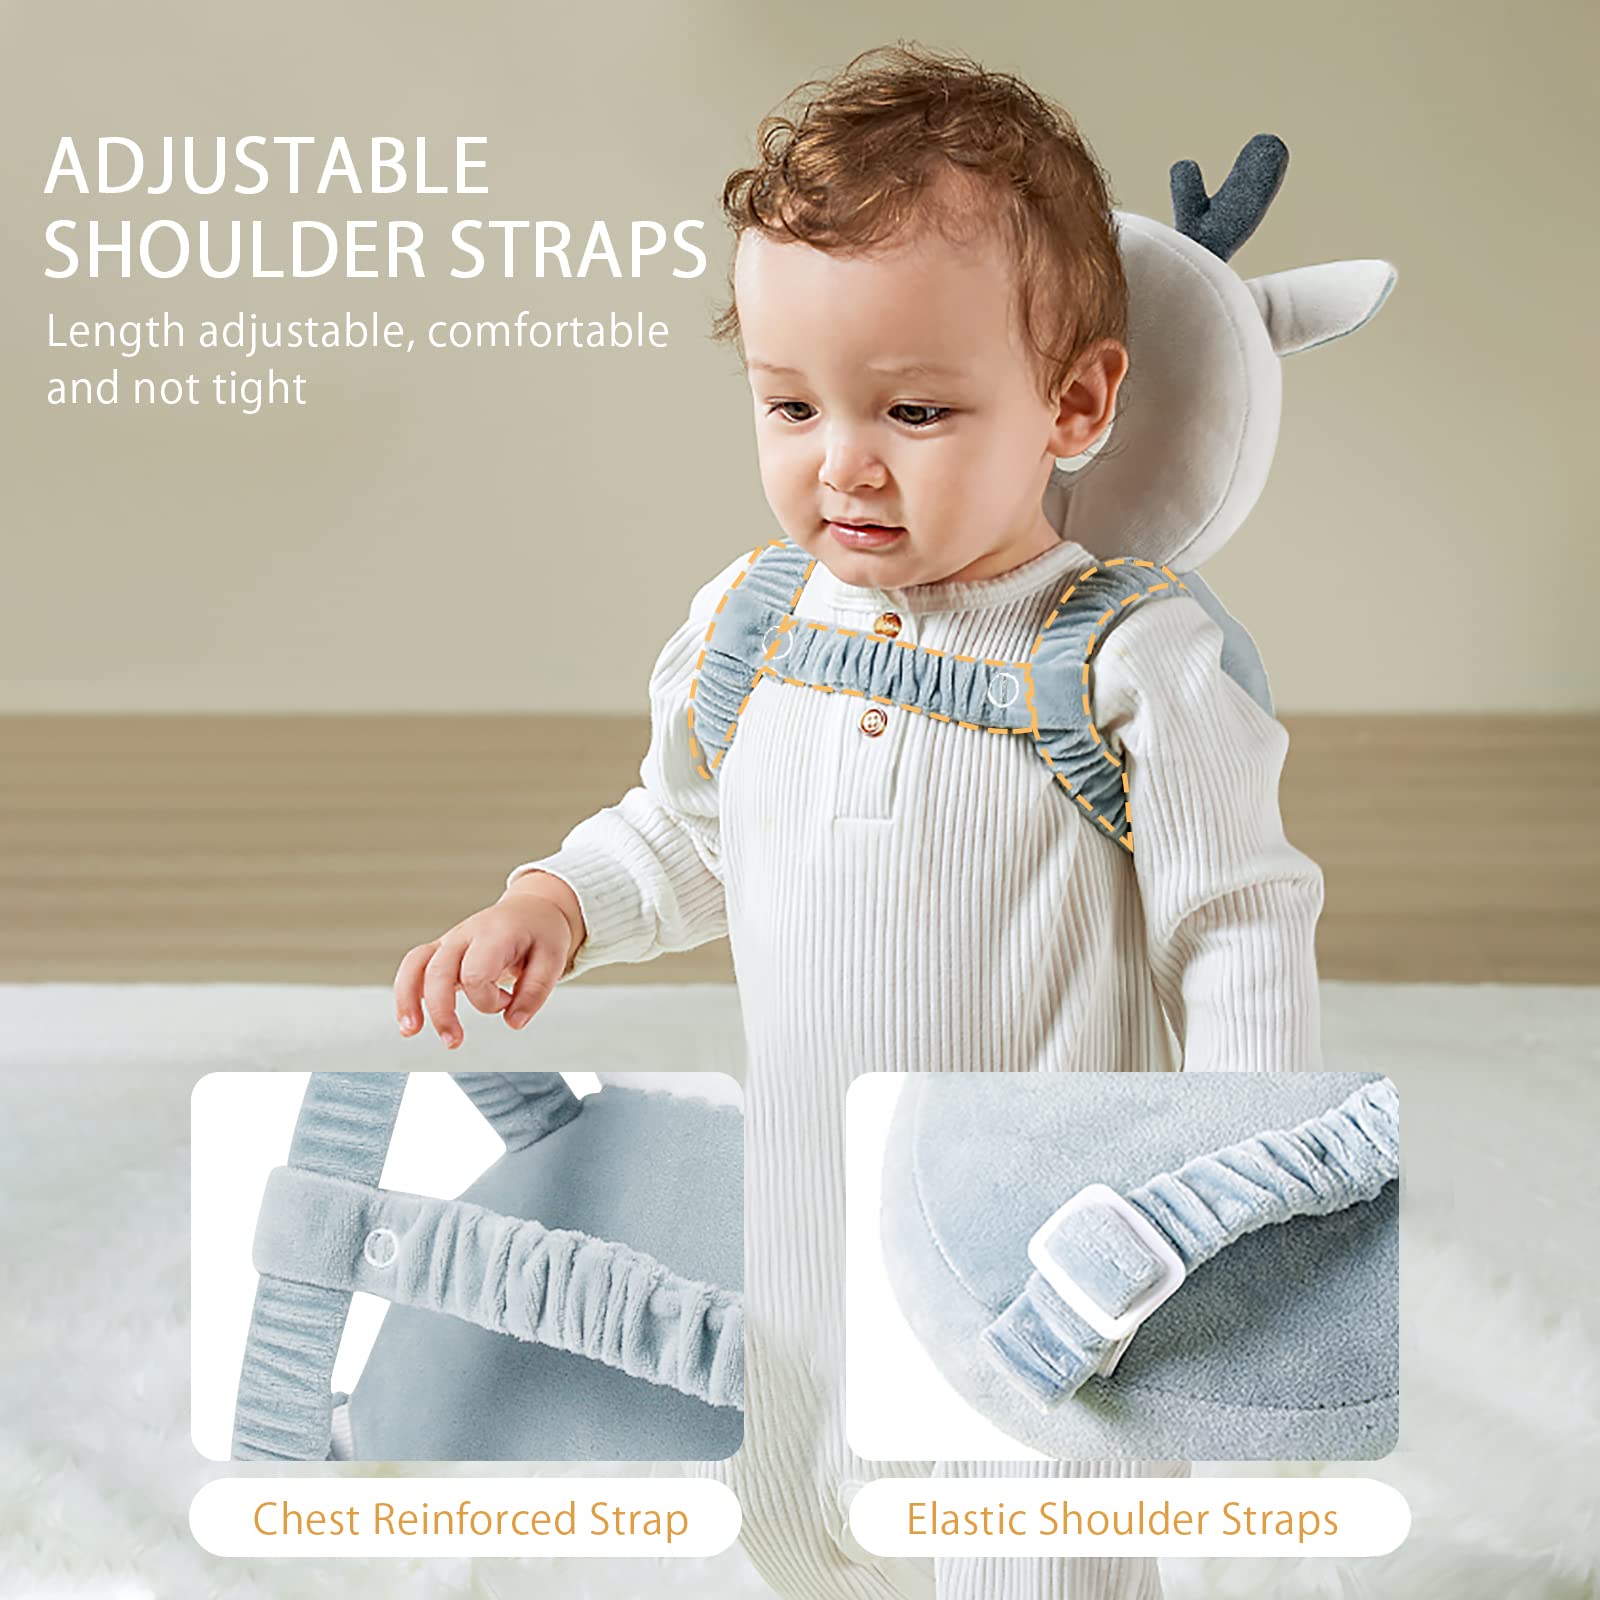 MQIFRB Baby Head Guard, Baby Fall Prevention Backpack, Anti-Tipping Helmet, Head Guard, Kids, Head Protection, Fall Prevention Cushion, Adjustable Shoulder Straps, Good Texture, Baby Supplies, Safe, Cute